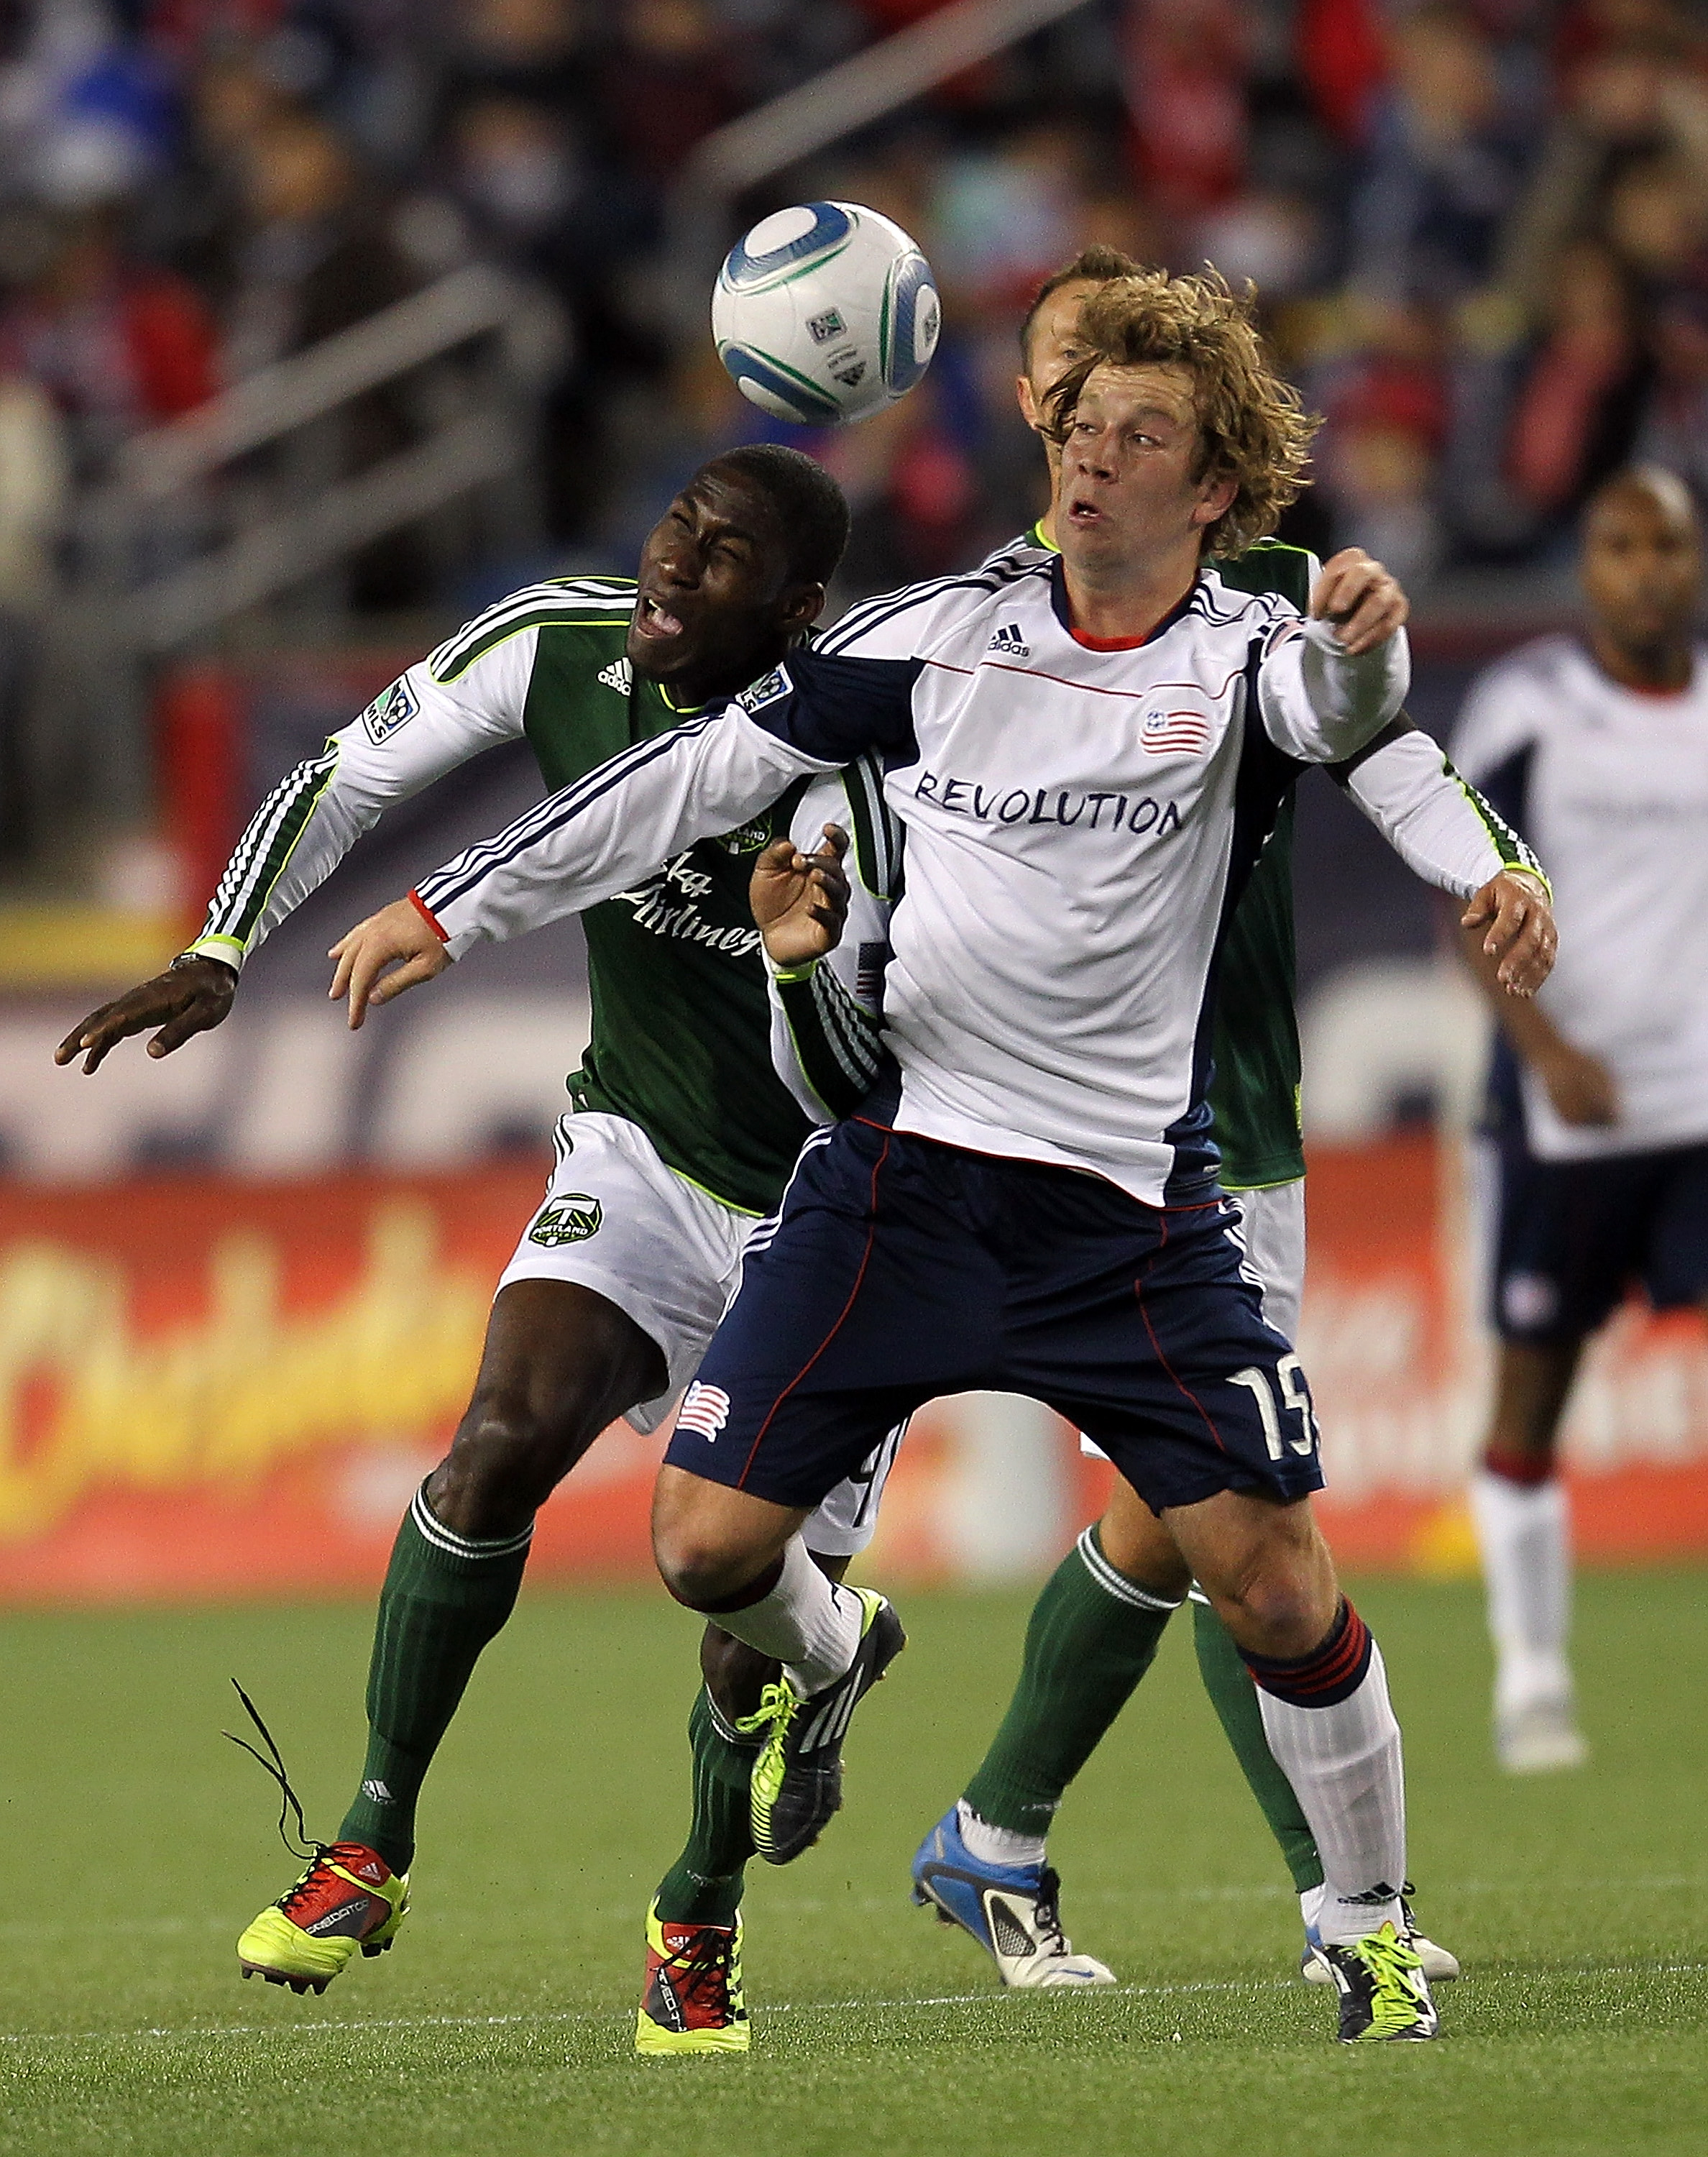 FOXBORO, MA - APRIL 2:  Zach Schilawski #15 the New England Revolution battles James Marcelin #14 of the Portland Timbers at Gillette Stadium on April 2, 2011 in Foxboro, Massachusetts. (Photo by Jim Rogash/Getty Images)